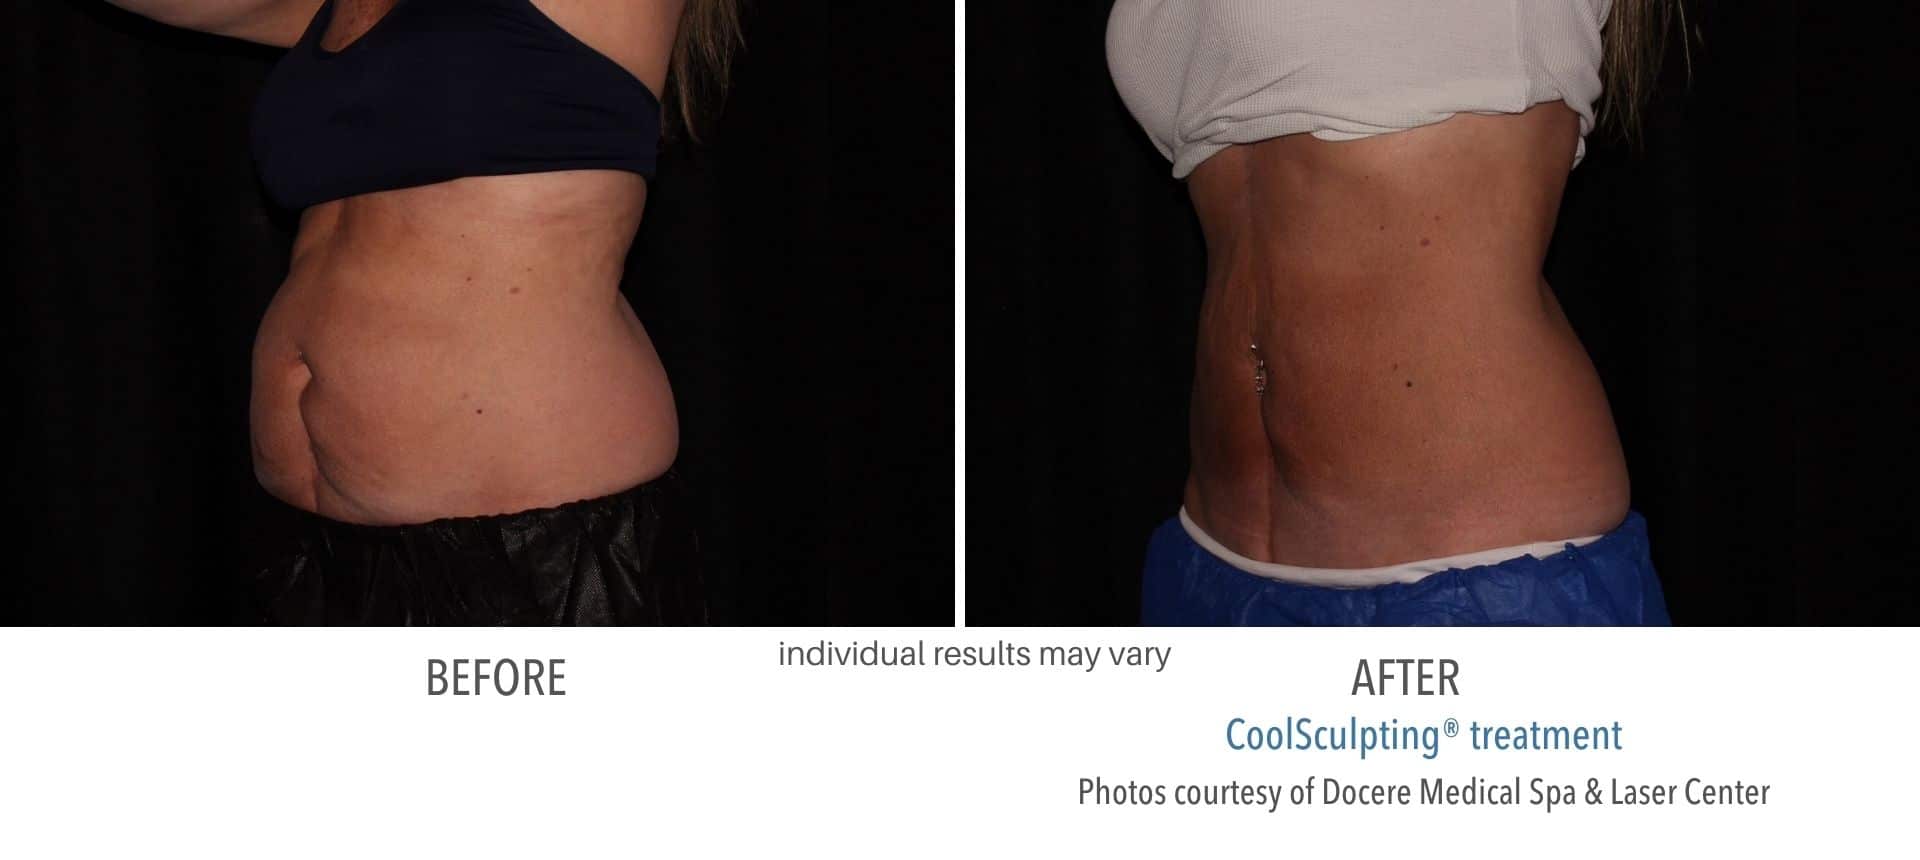 Before and After CoolSculpting treatment from Docere Medical Spa